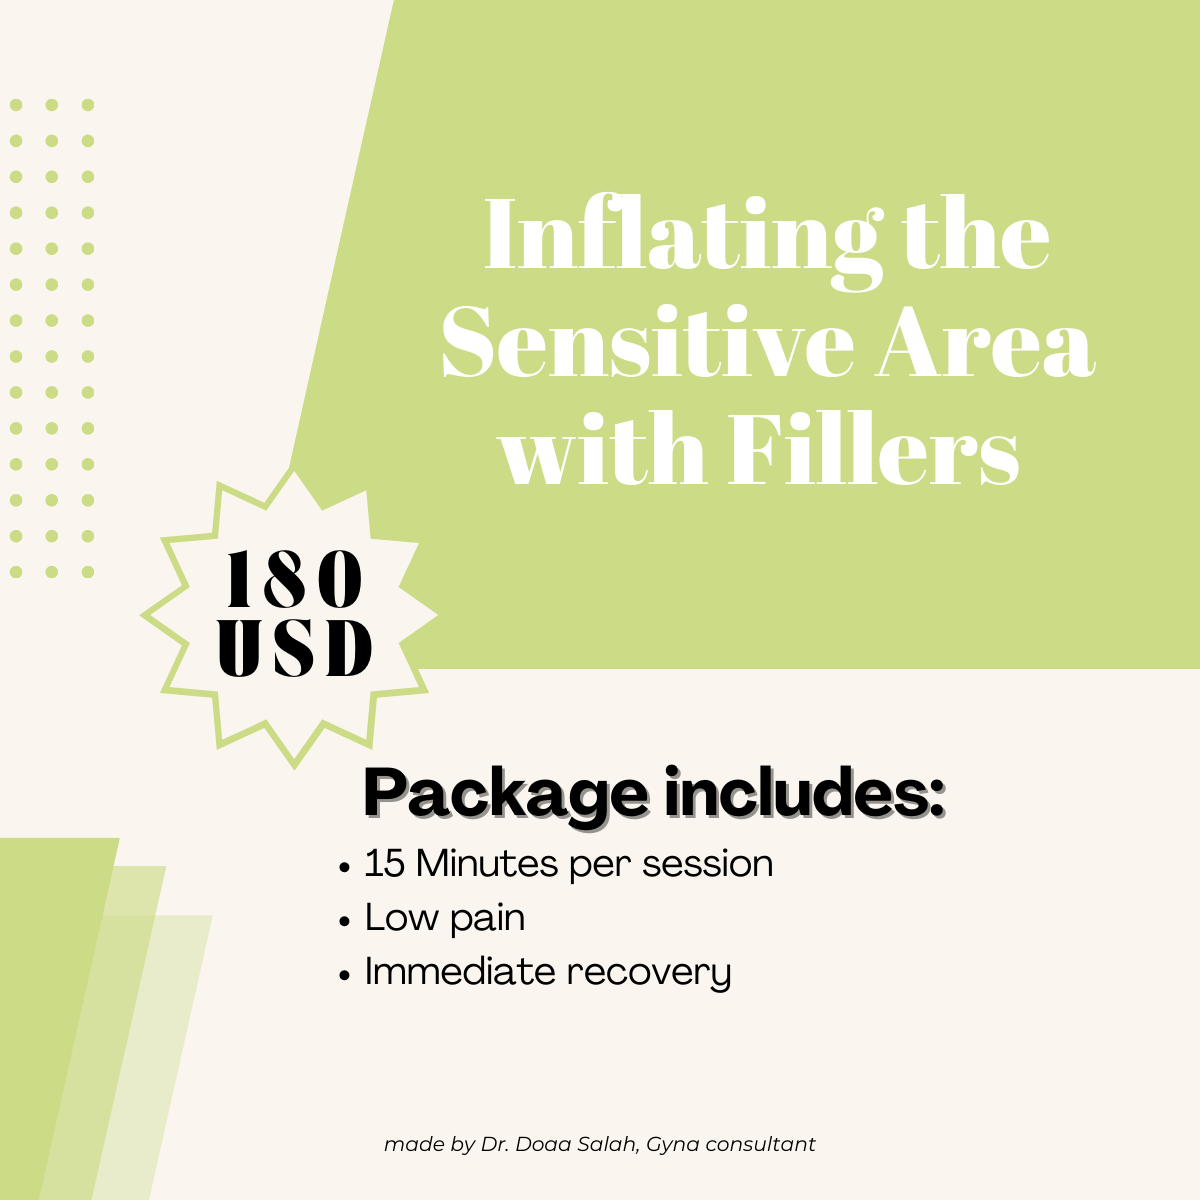 Inflating the sensitive area with fillers